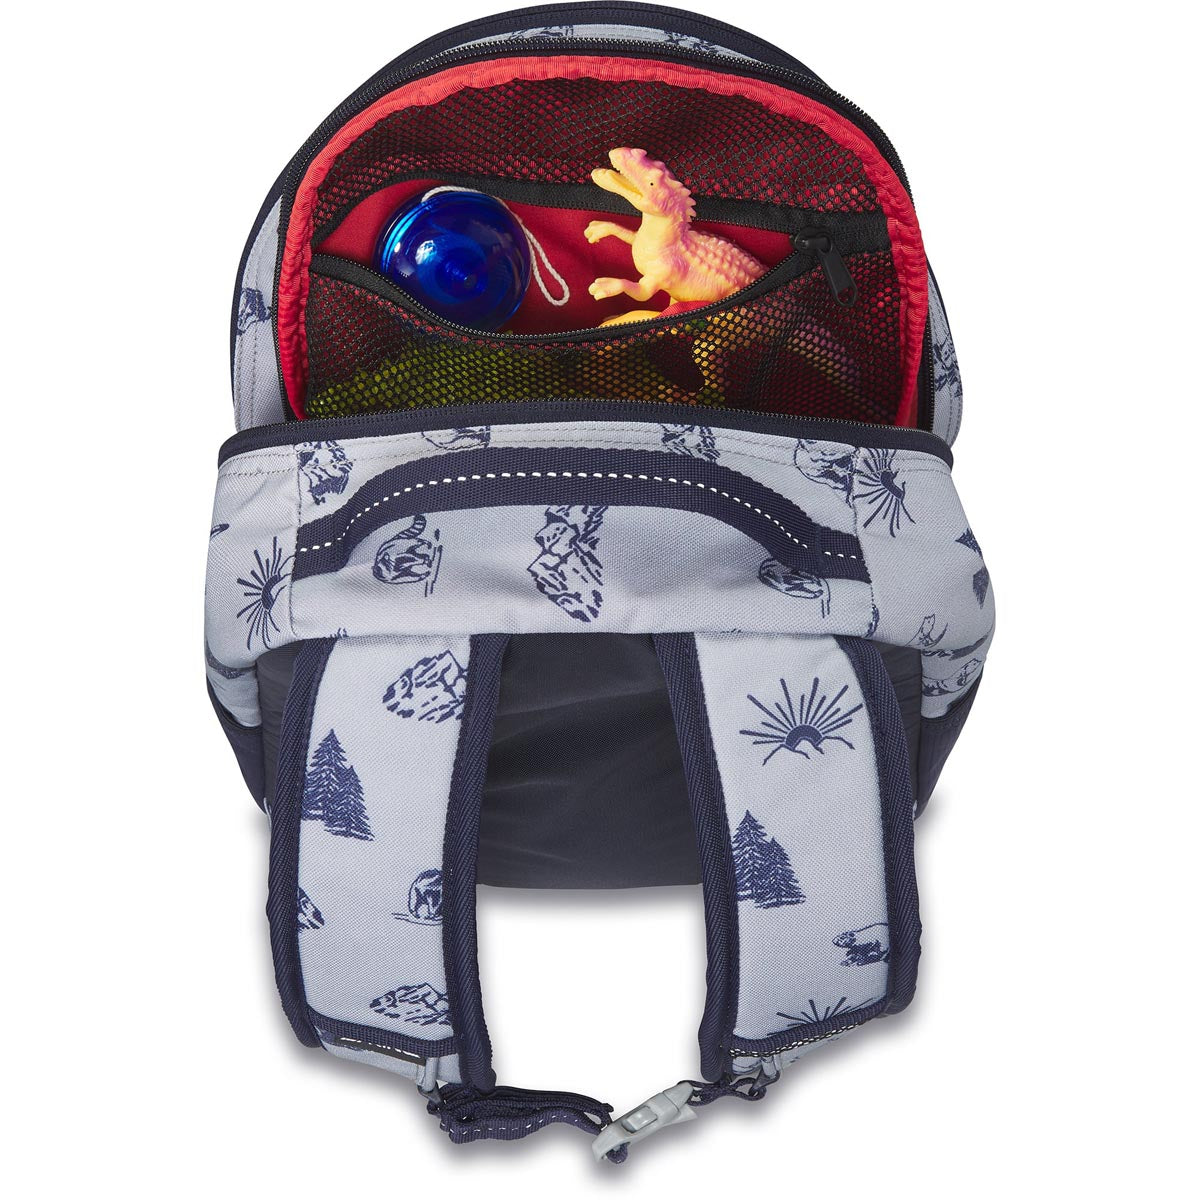 Dakine Youth Mission 18l Backpack - Jungle Punch image 5